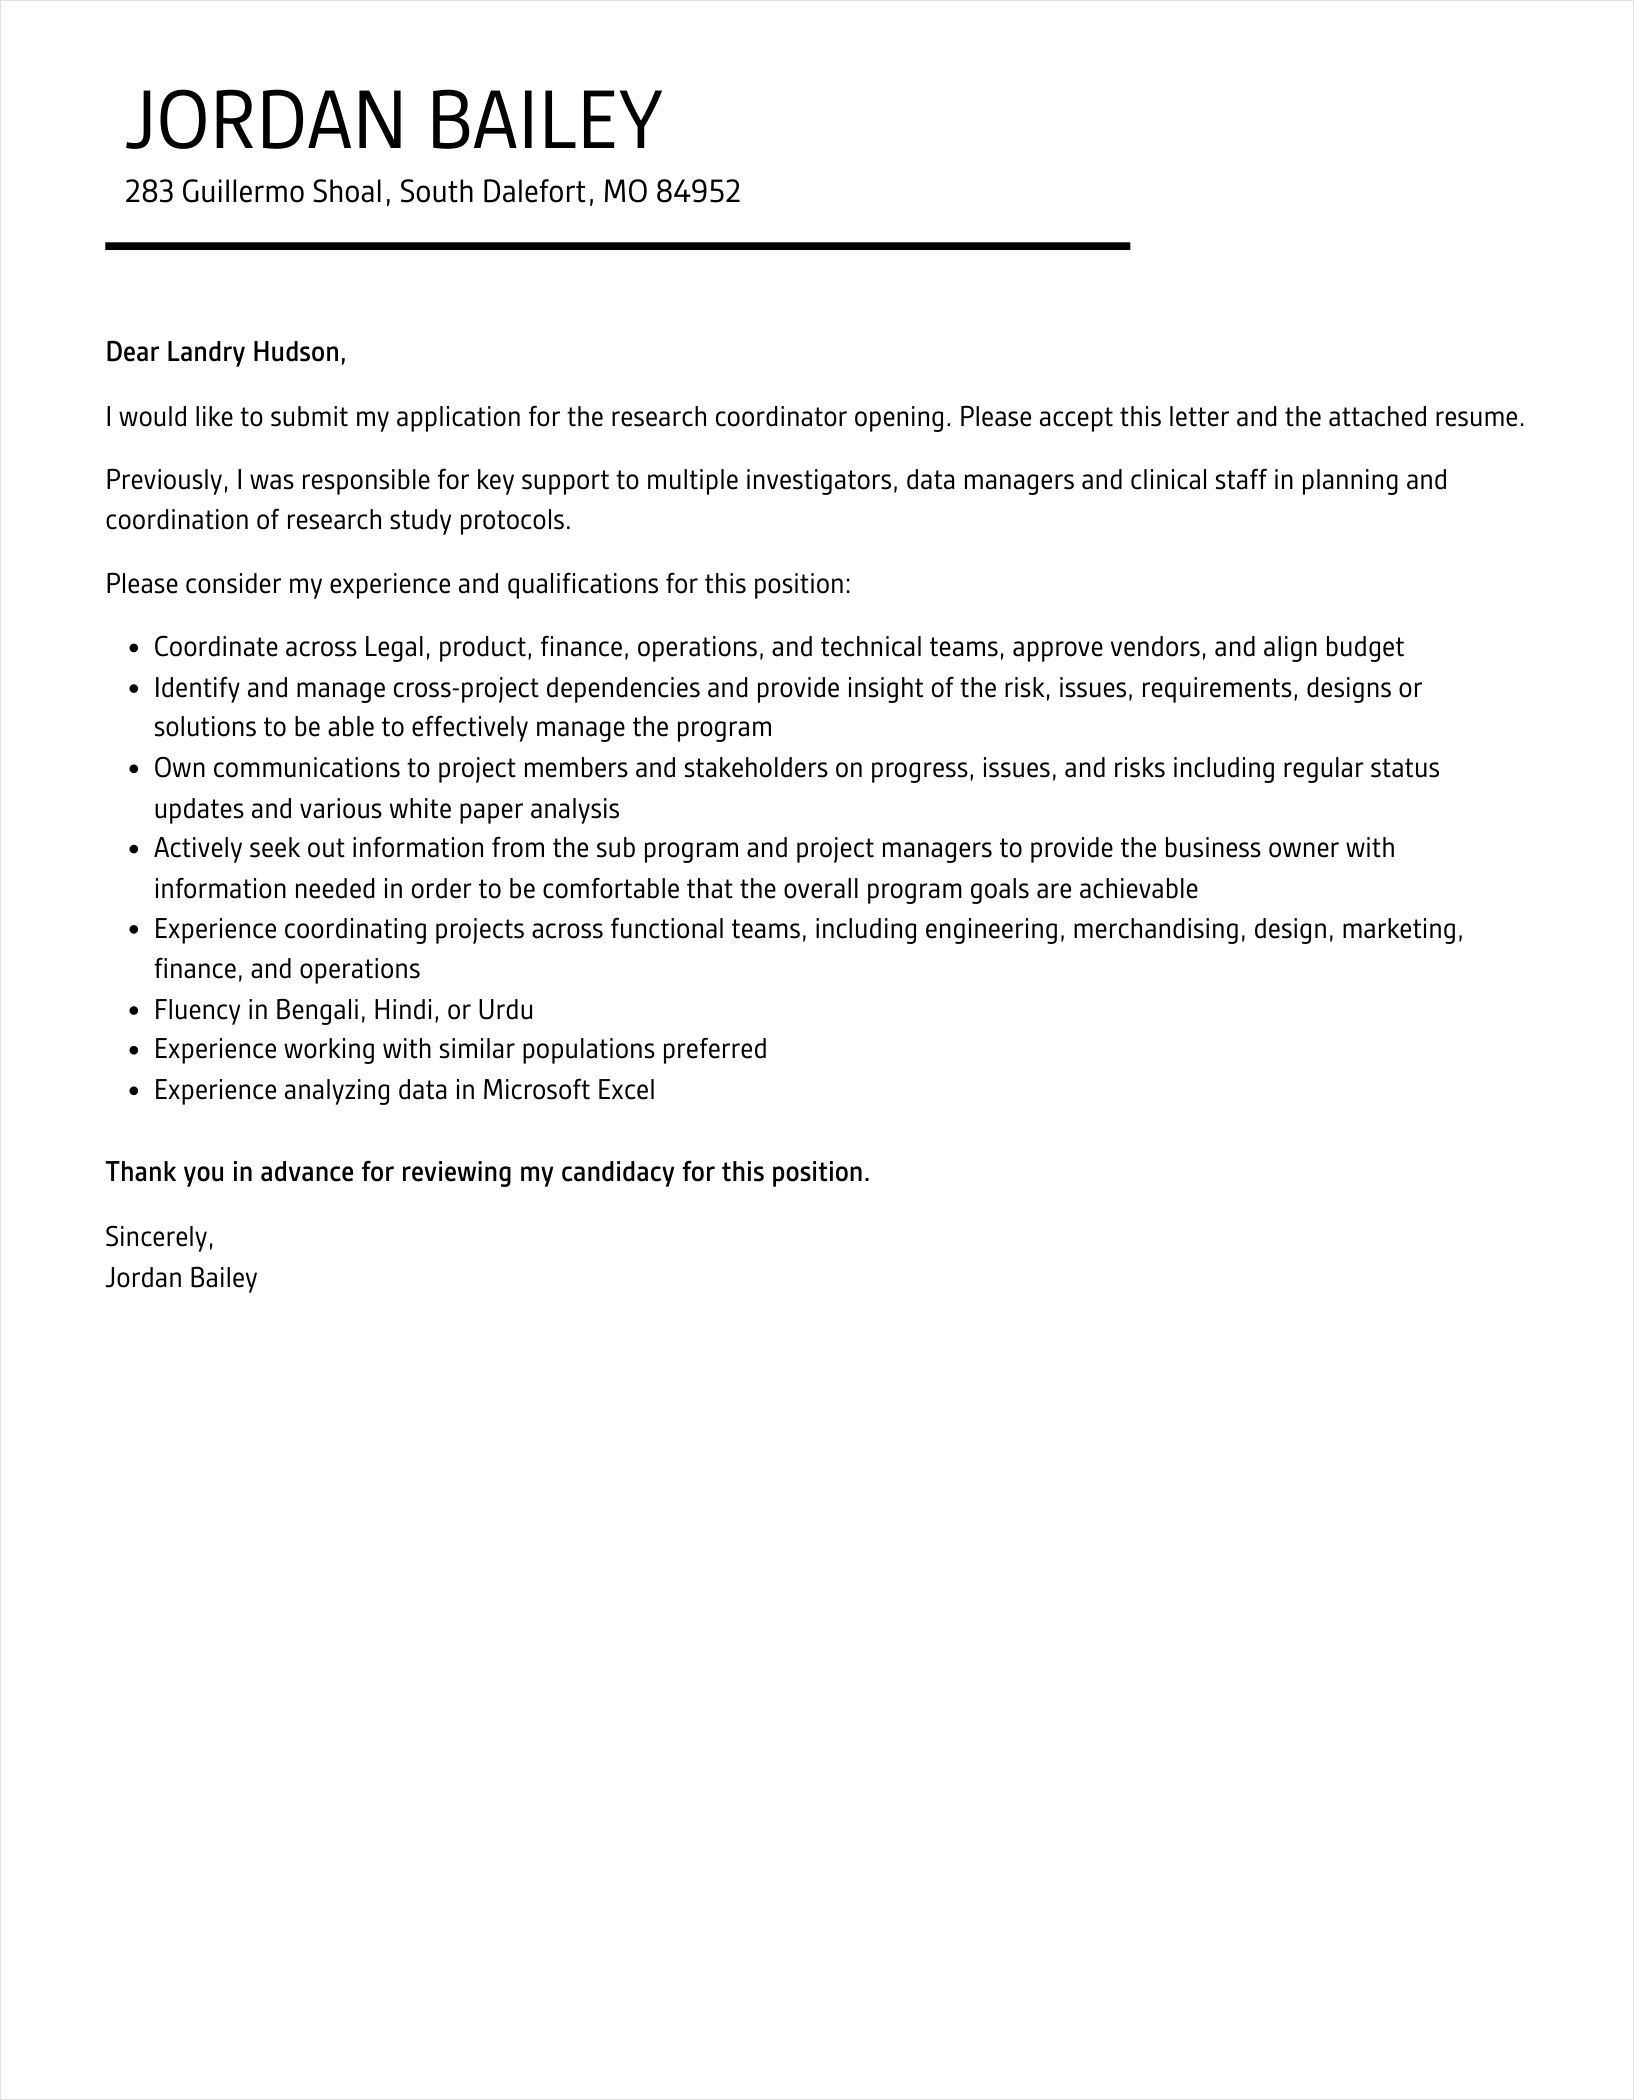 example of research coordinator cover letter template